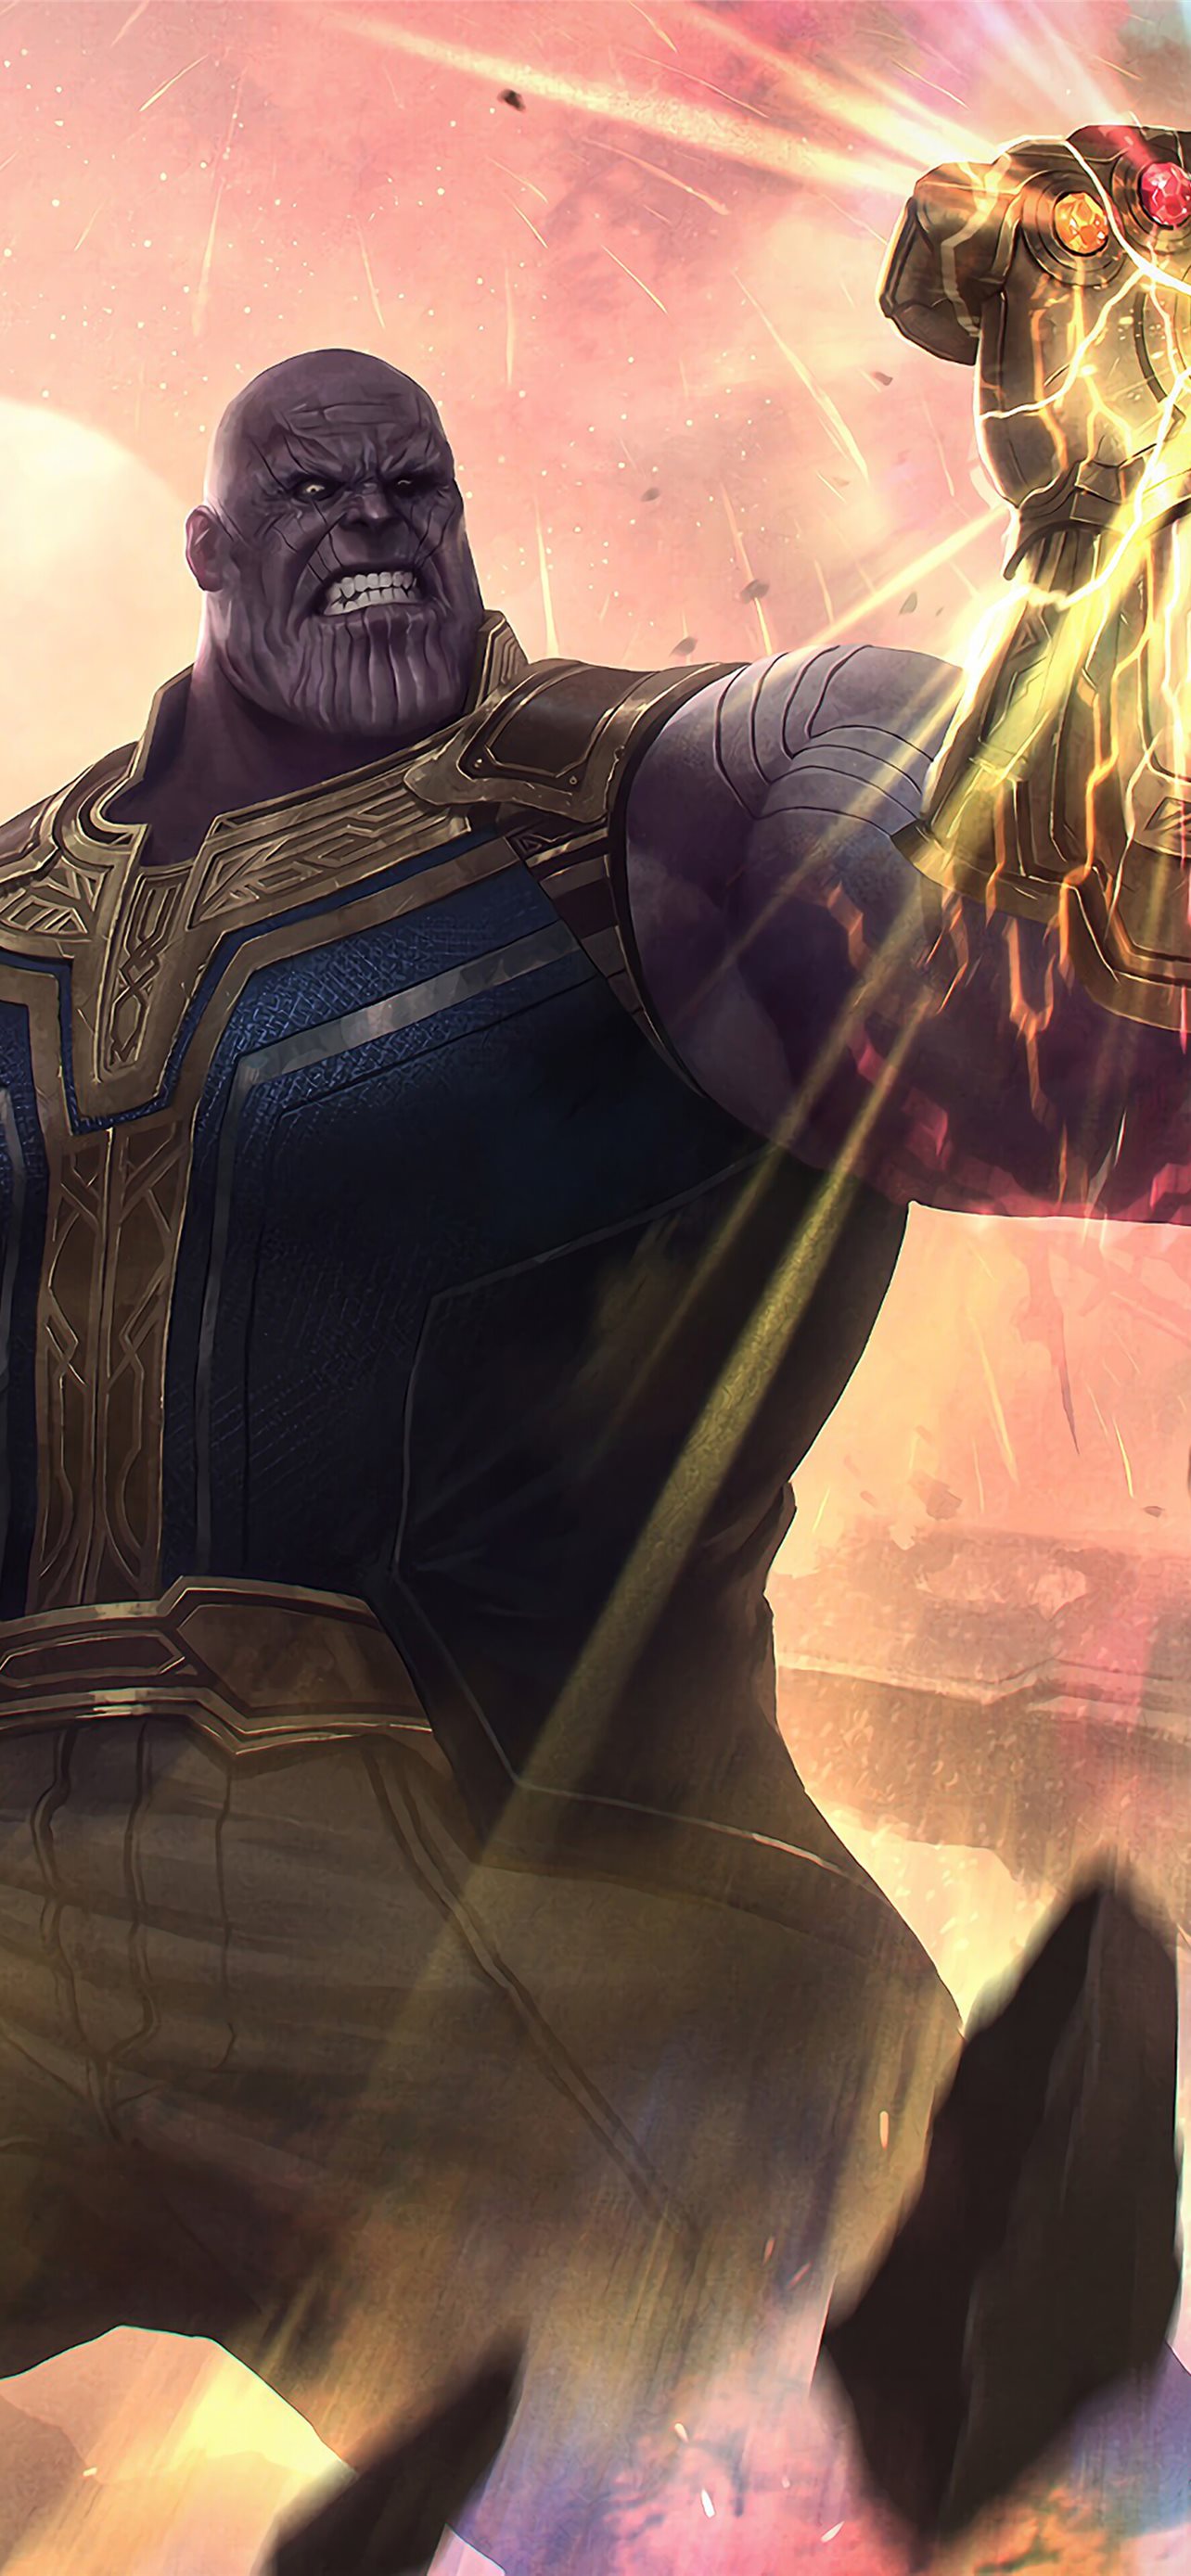 330517 Thanos Infinity Gauntlet Avengers Endgame 4 iPhone Wallpapers  Free Download